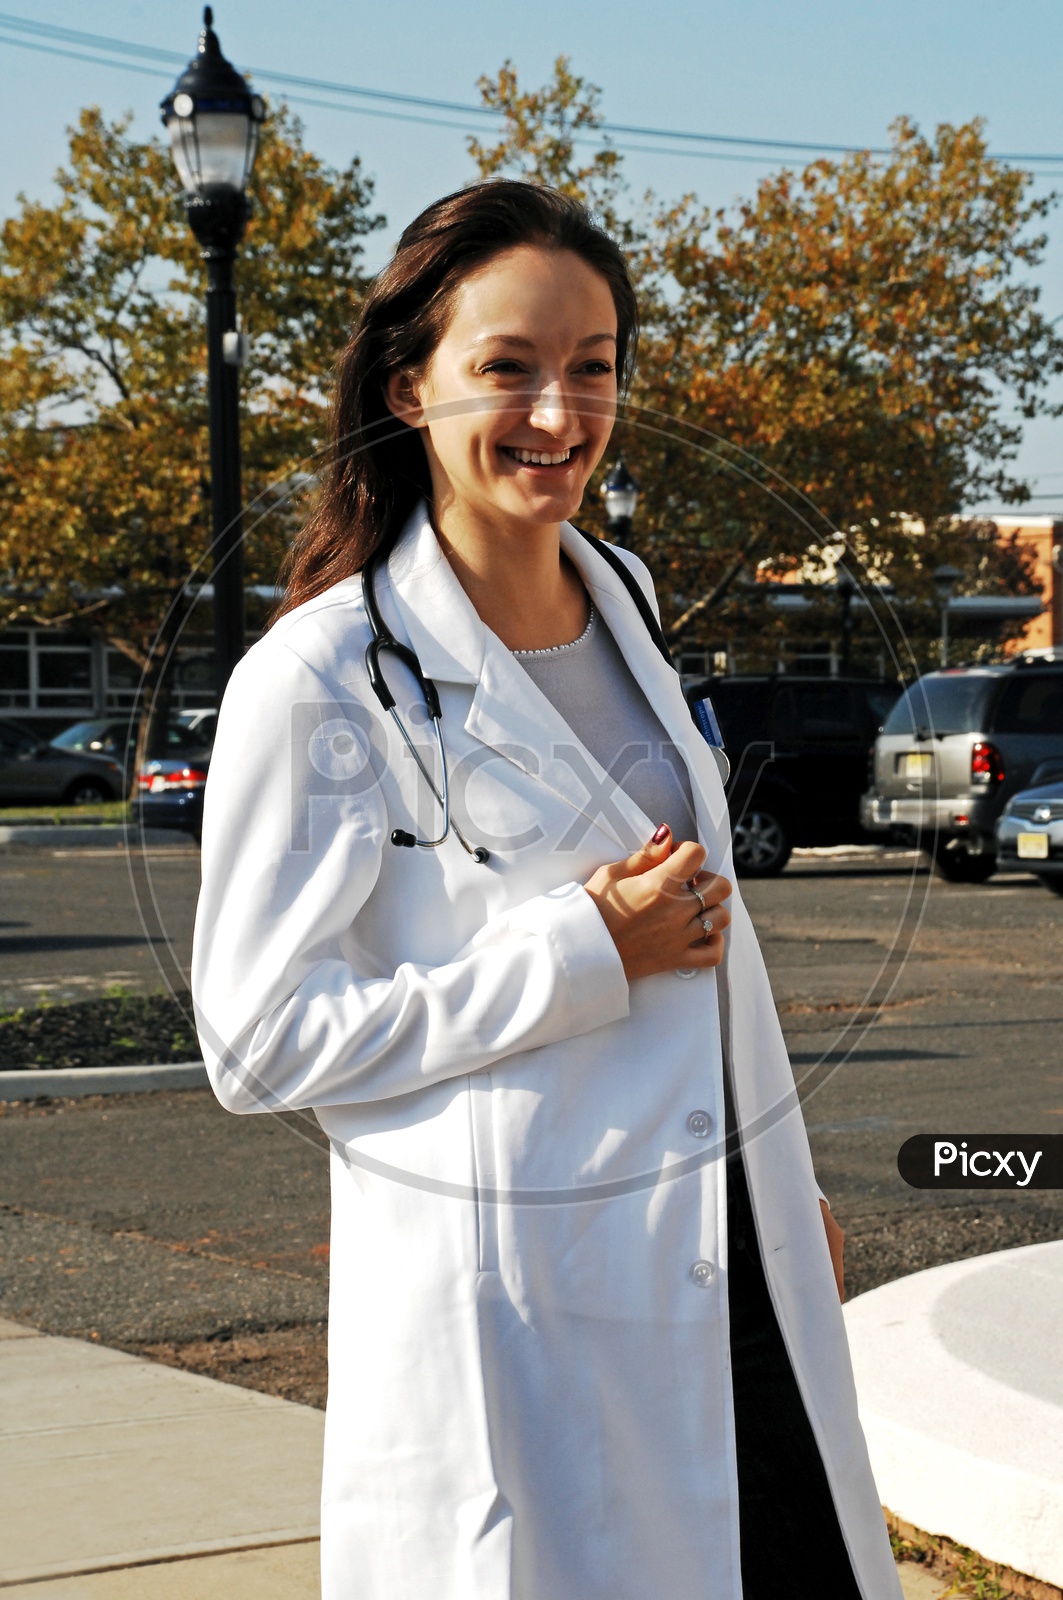 An young female doctor smiling on the road